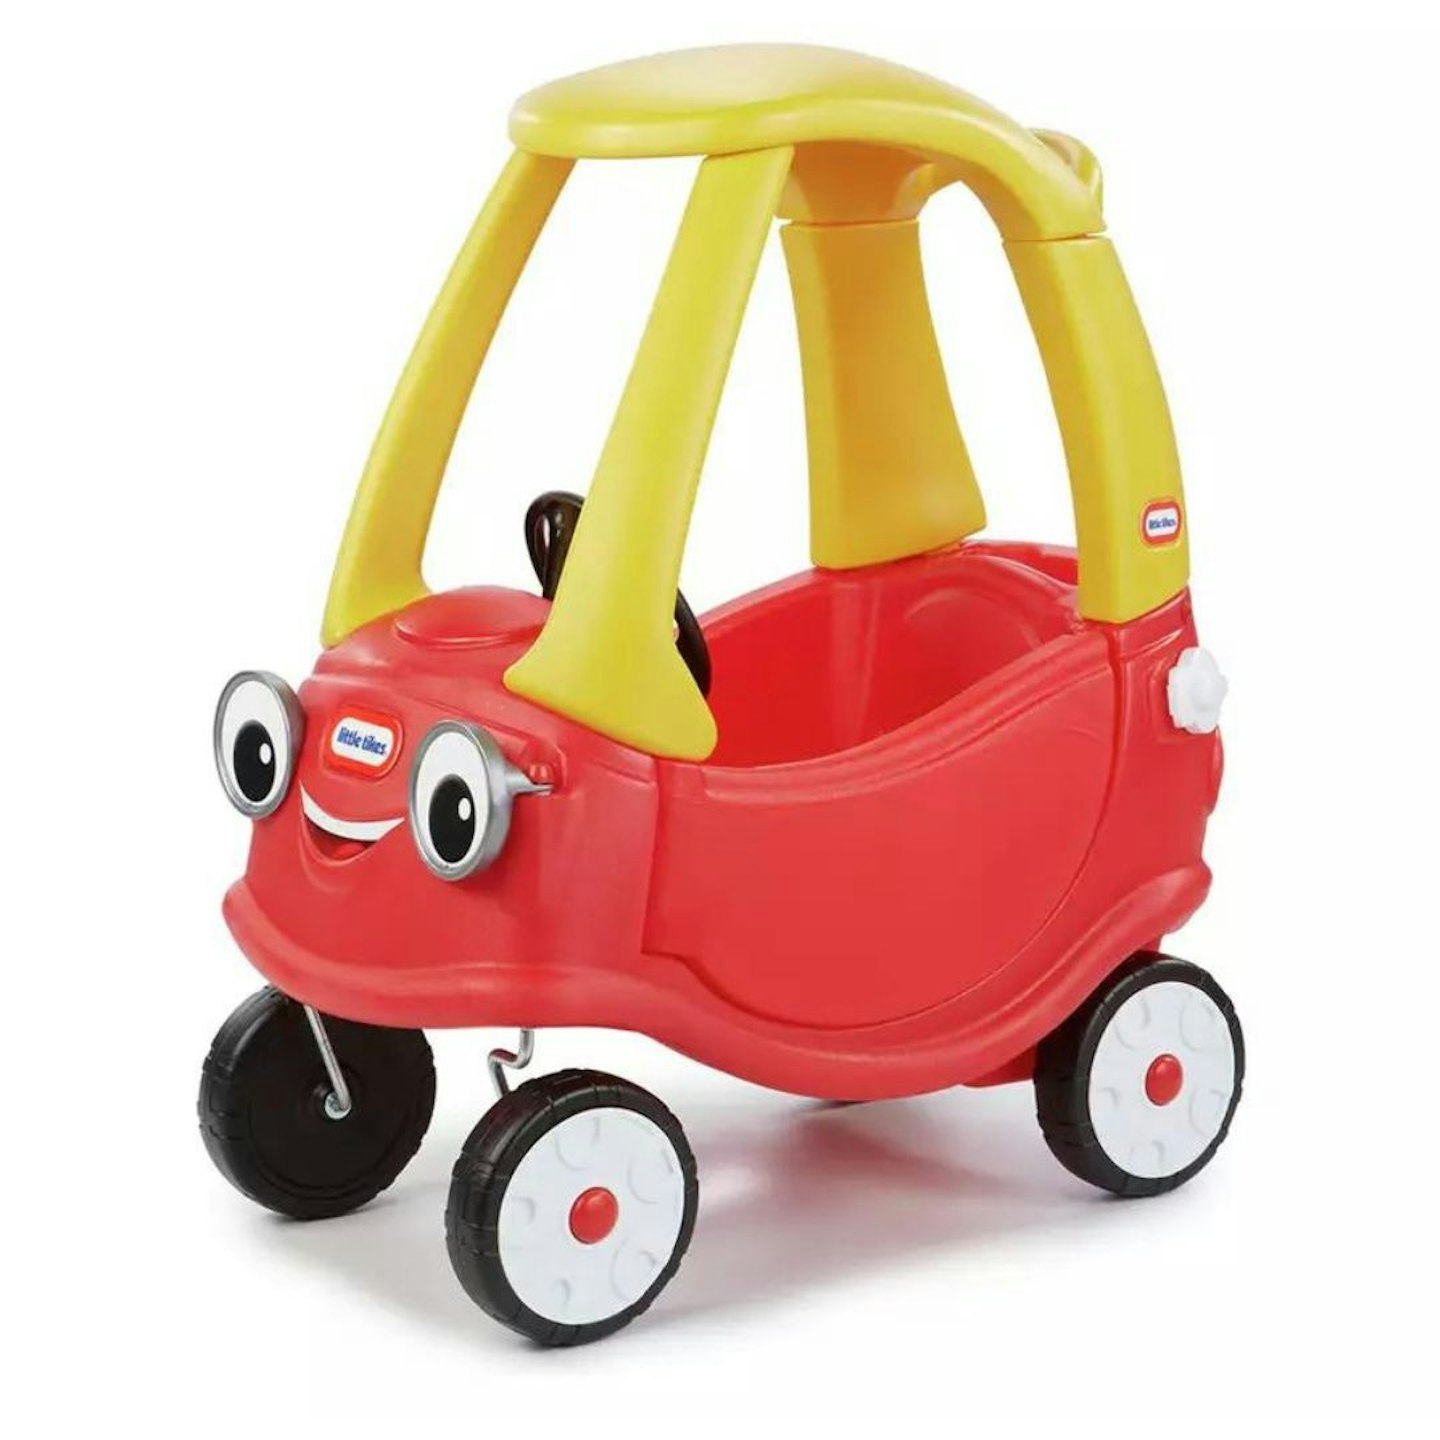 Little Tikes Cozy Coupe Ride On